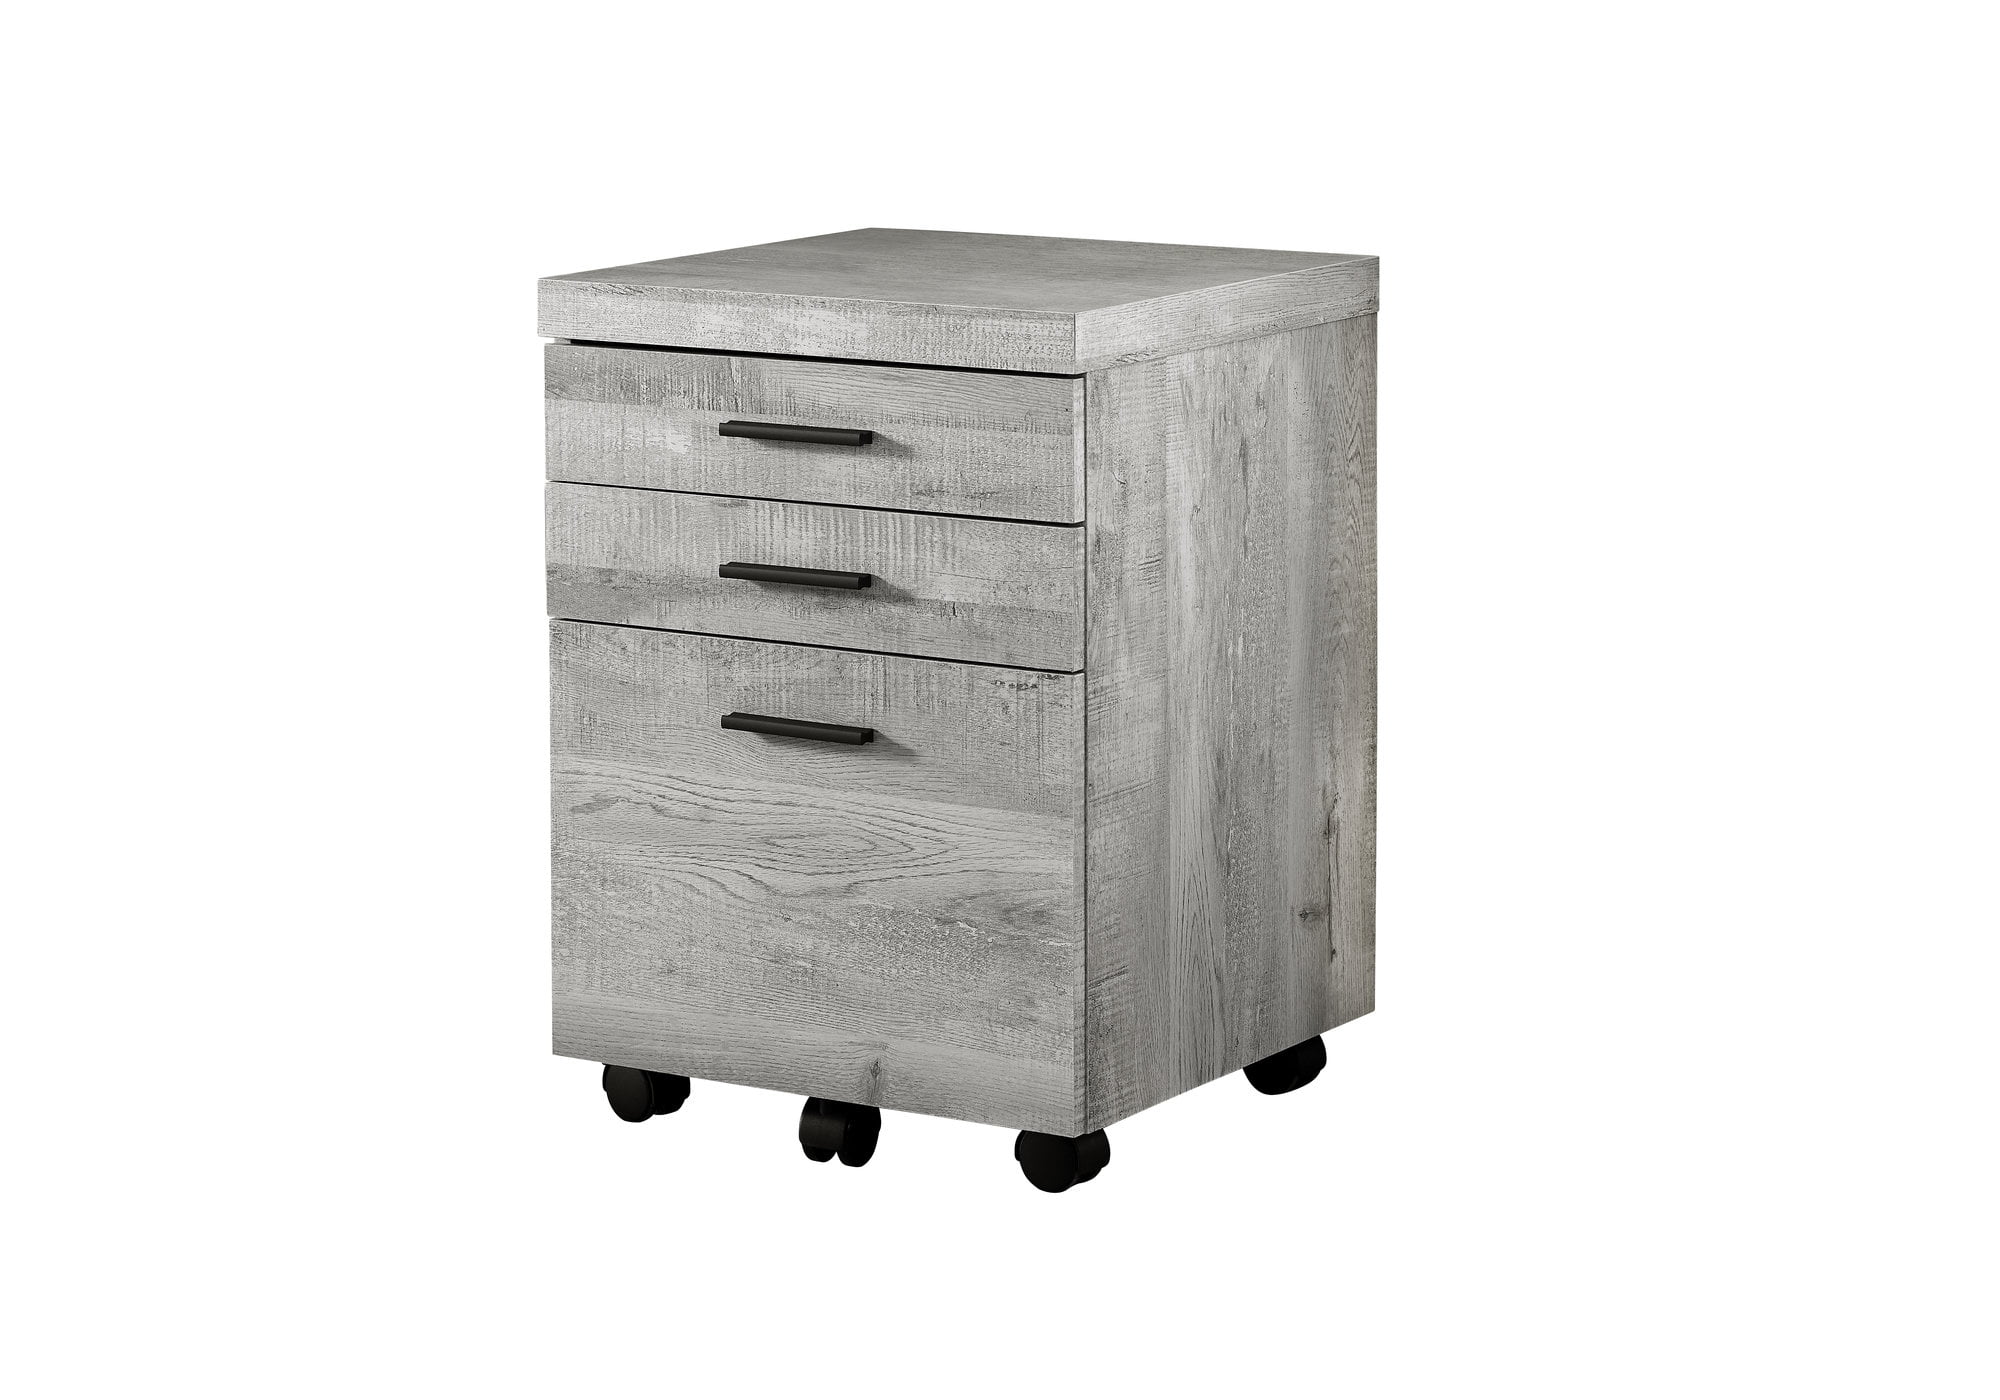 Details about   Monarch 3 Drawer Rolling Portable Filing Cabinet White 